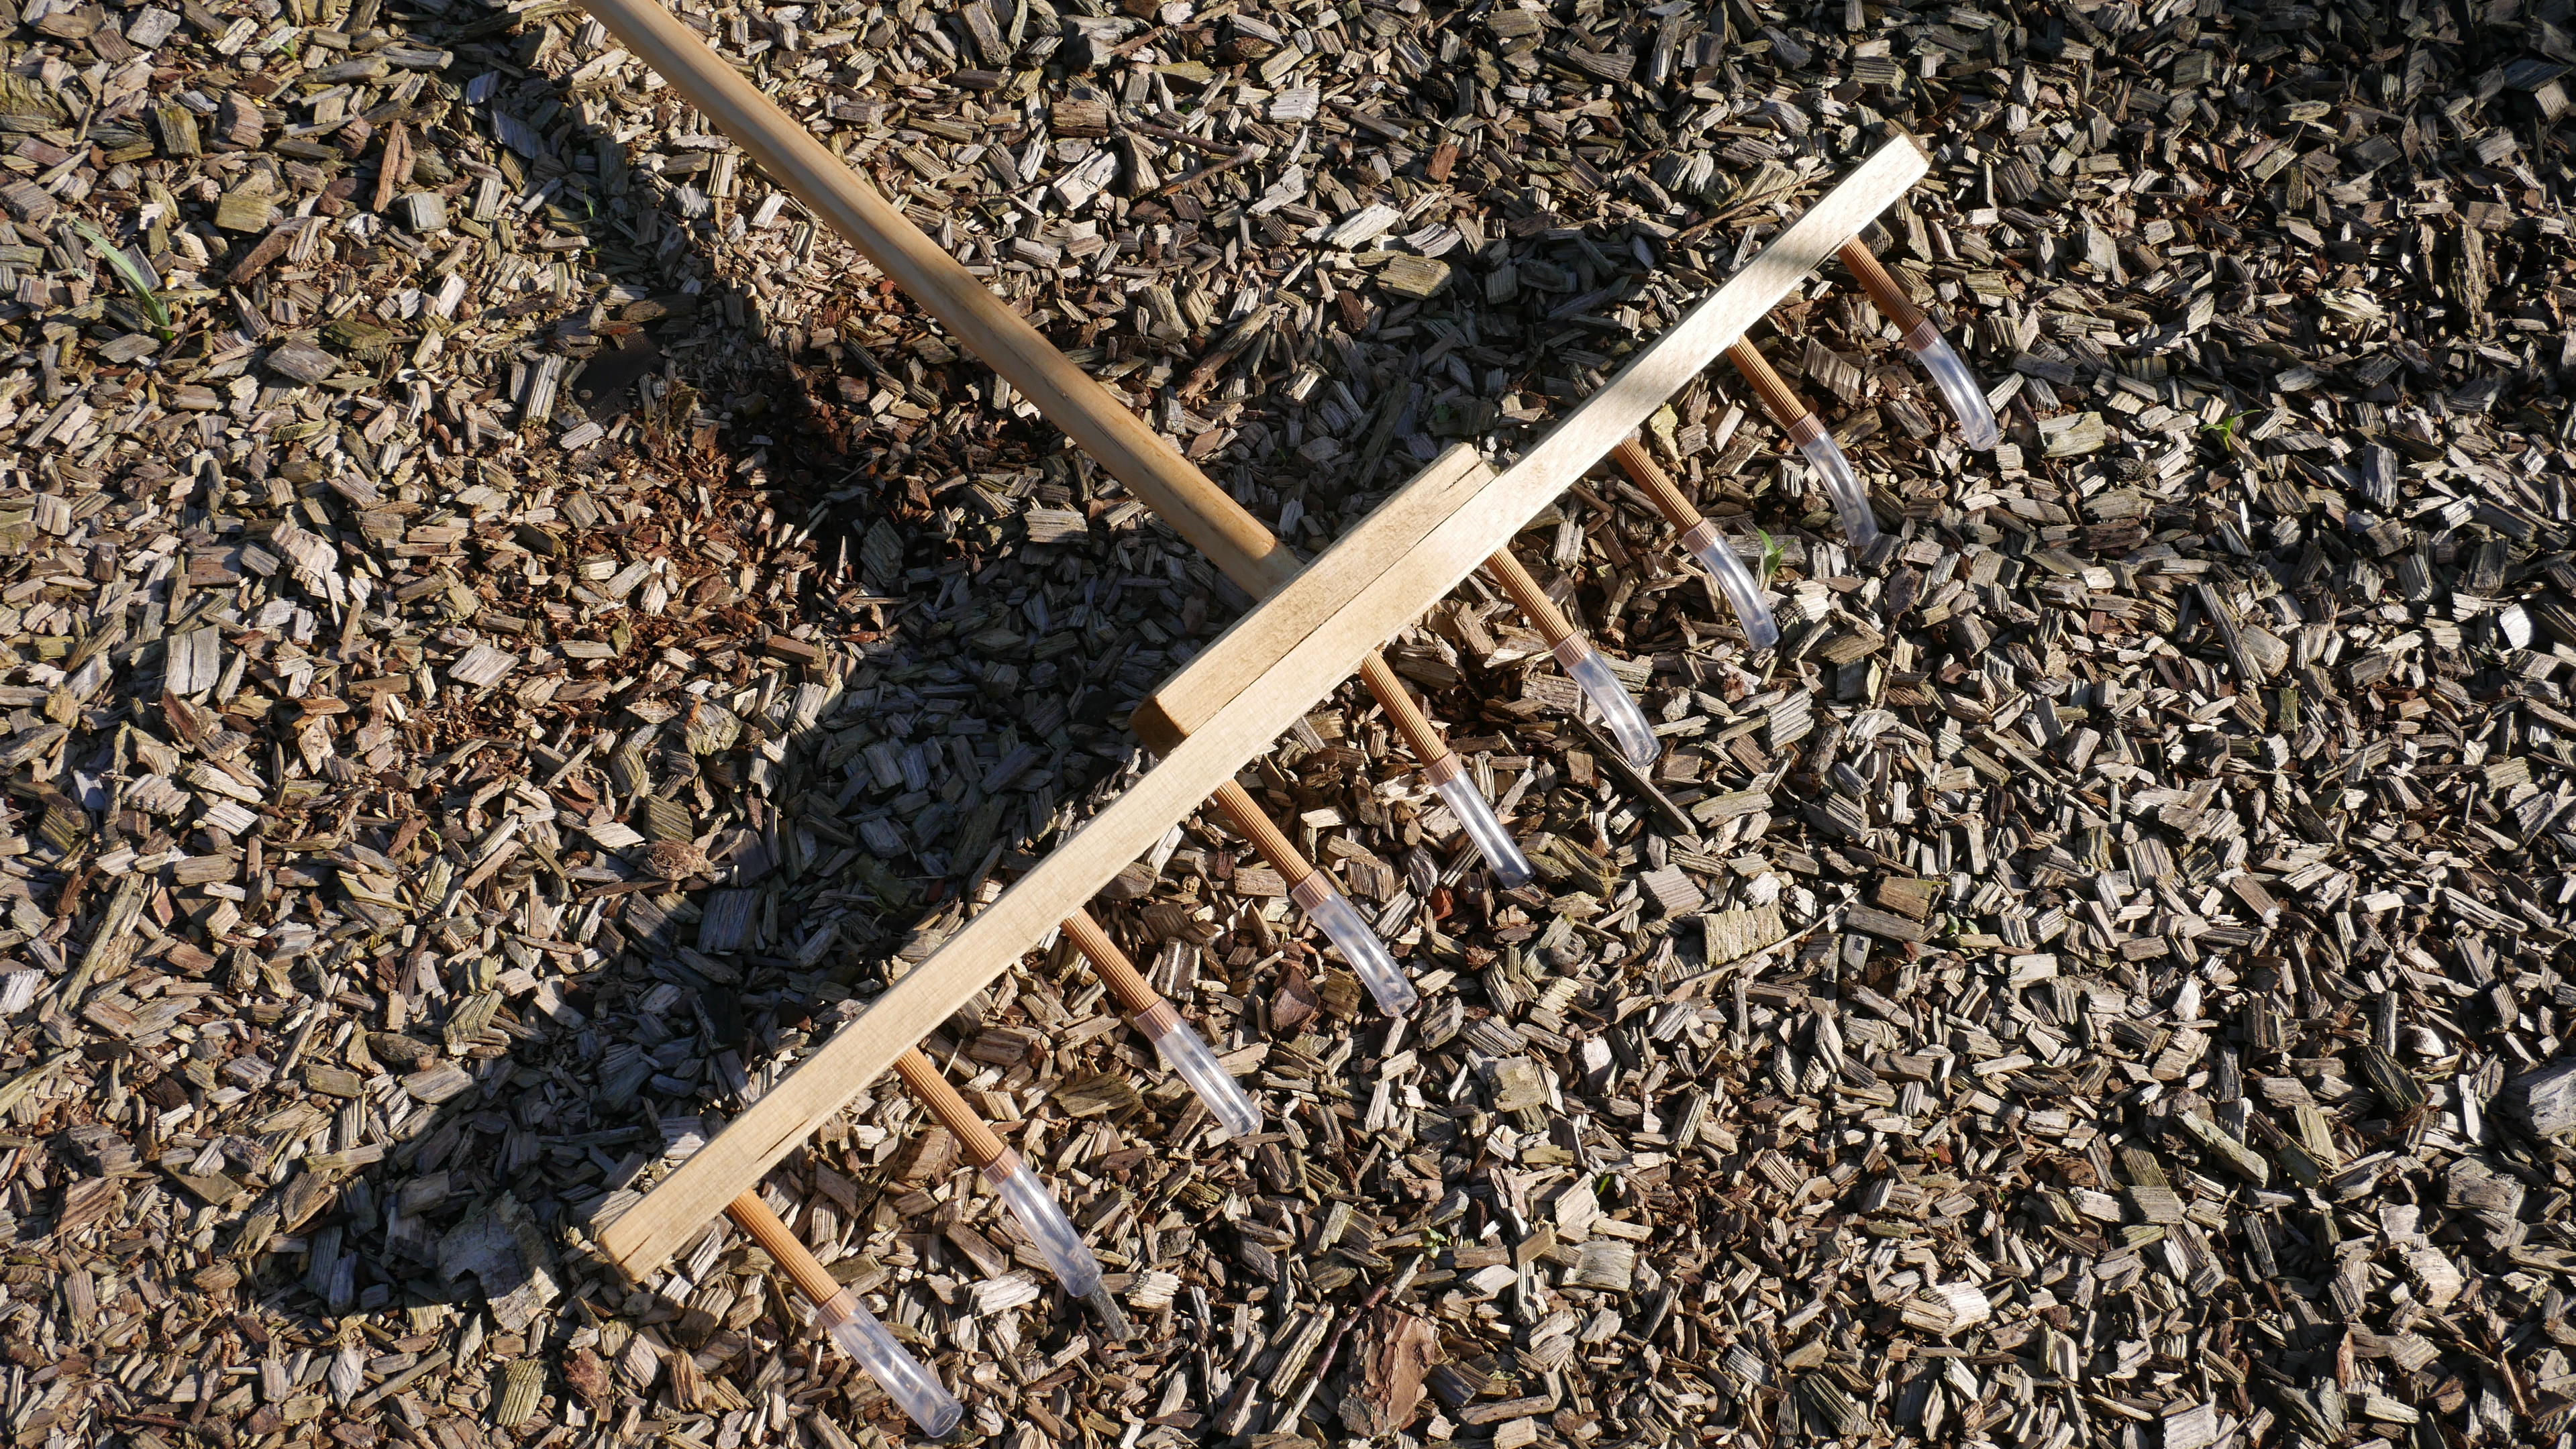 wooden rake with pieces of hose on the pins for marking drills in garden beds.